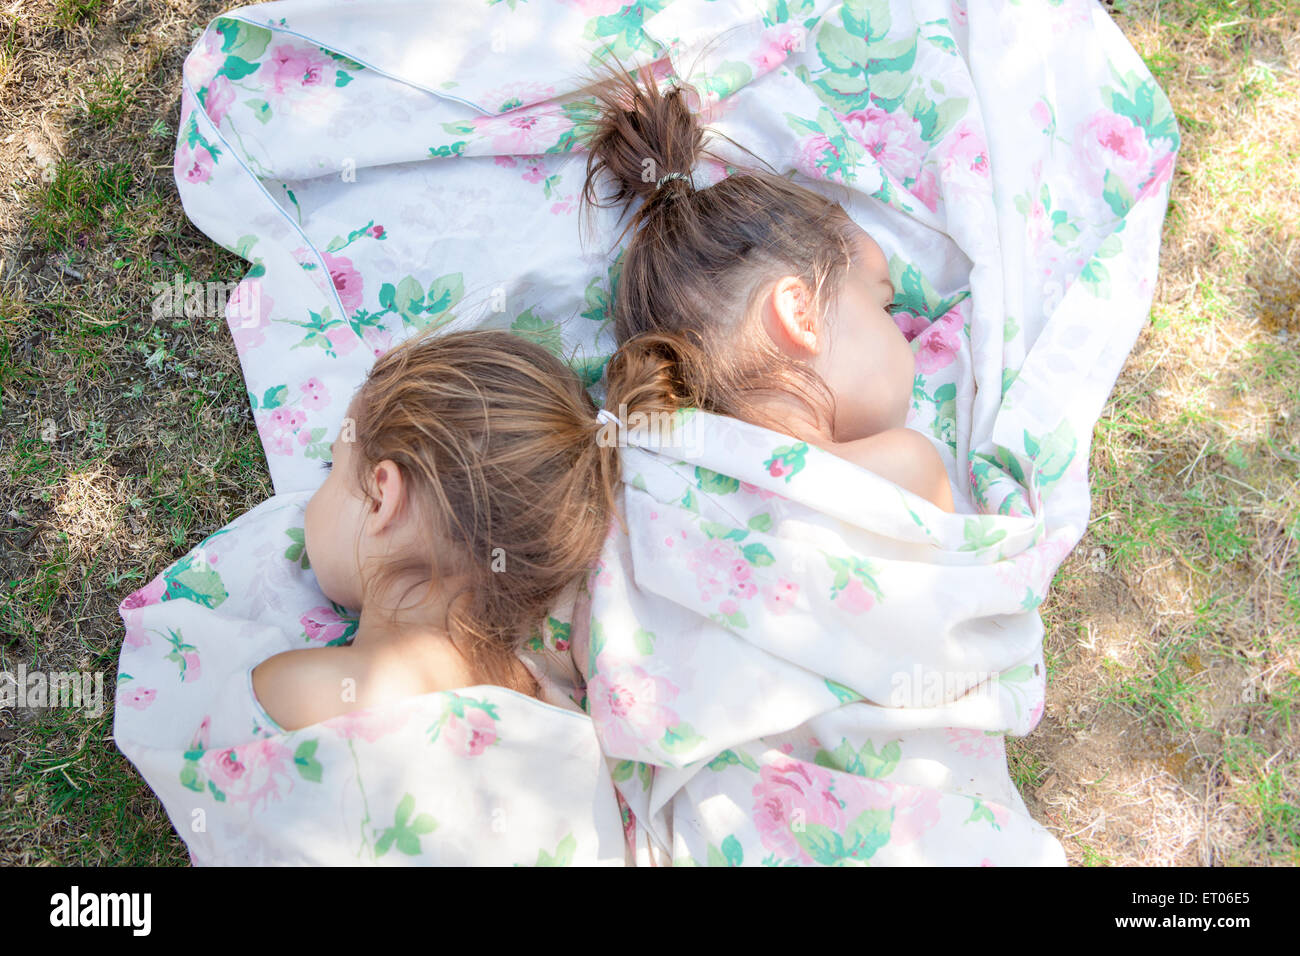 Twin girls napping in floral sheet on grass Stock Photo